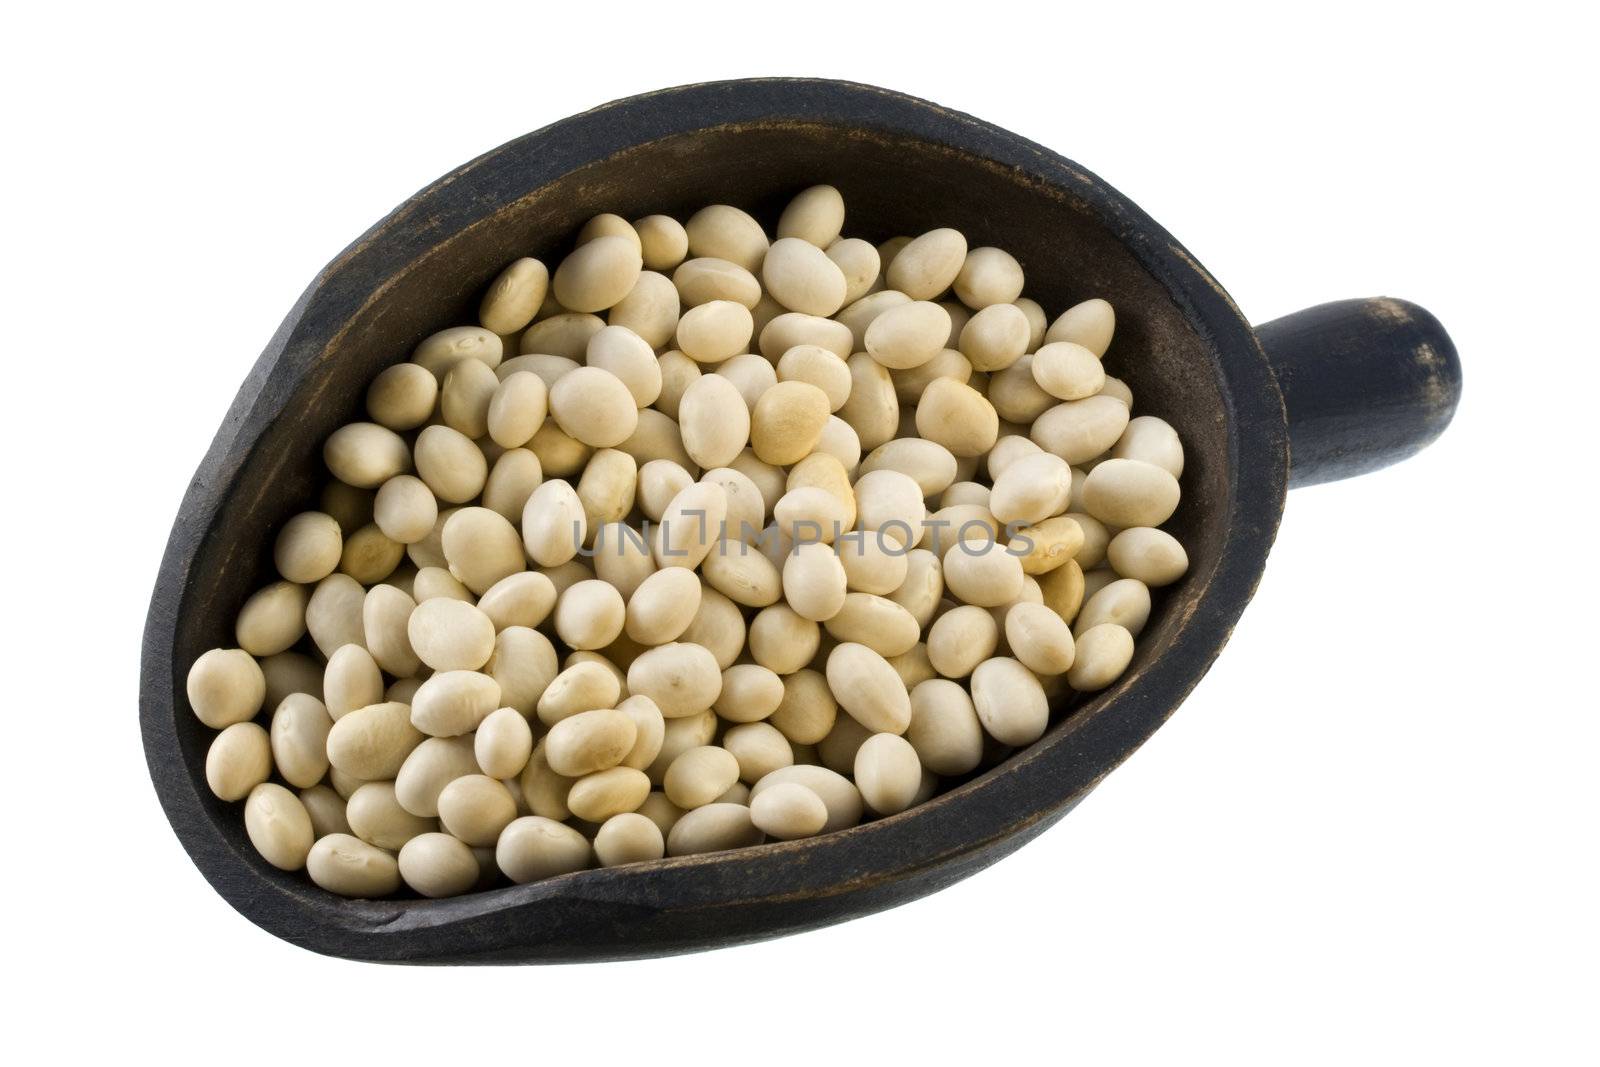 white navy beans on a primitive, wooden, dark painted scoop, isolated on white